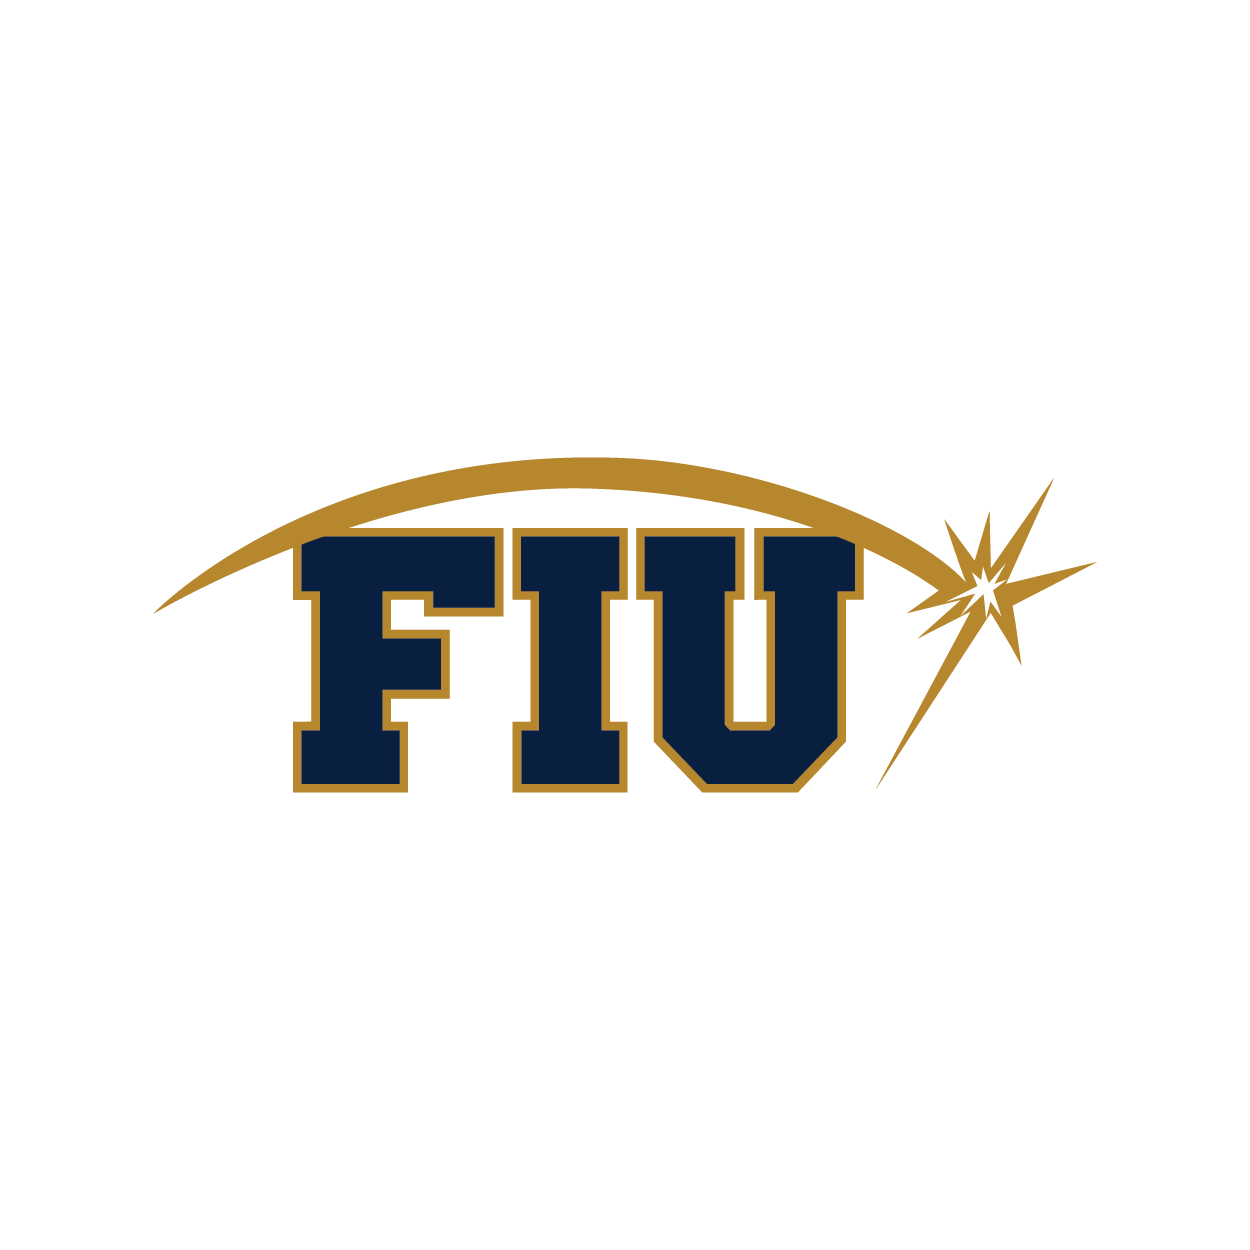 The pin for 2012 was a navy blue FIU with a gold spark over it